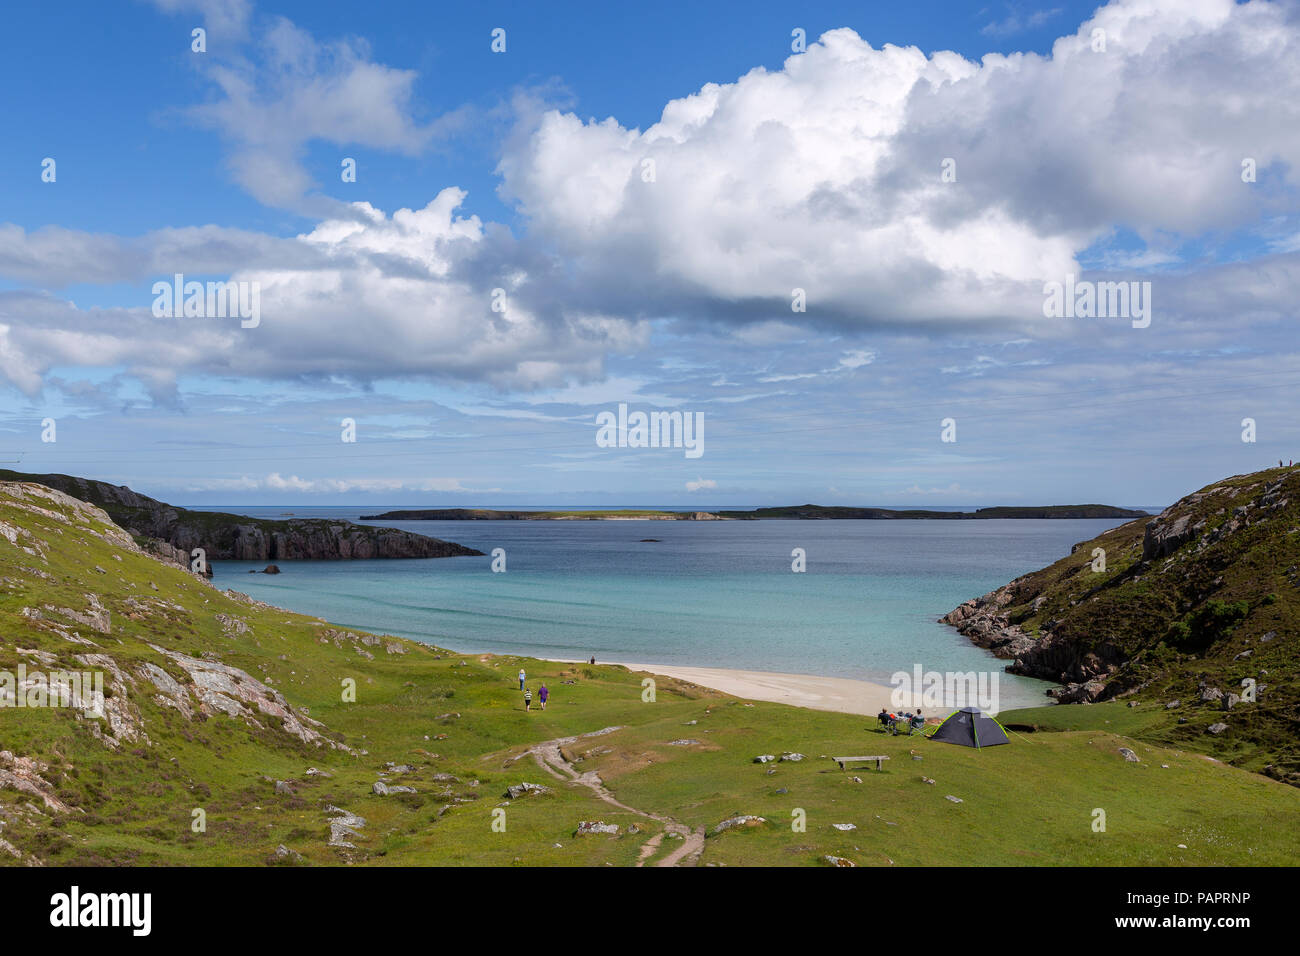 People camping and enjoying the beach at Ceannabeinne, near Durness, Sutherland, Scotland Stock Photo